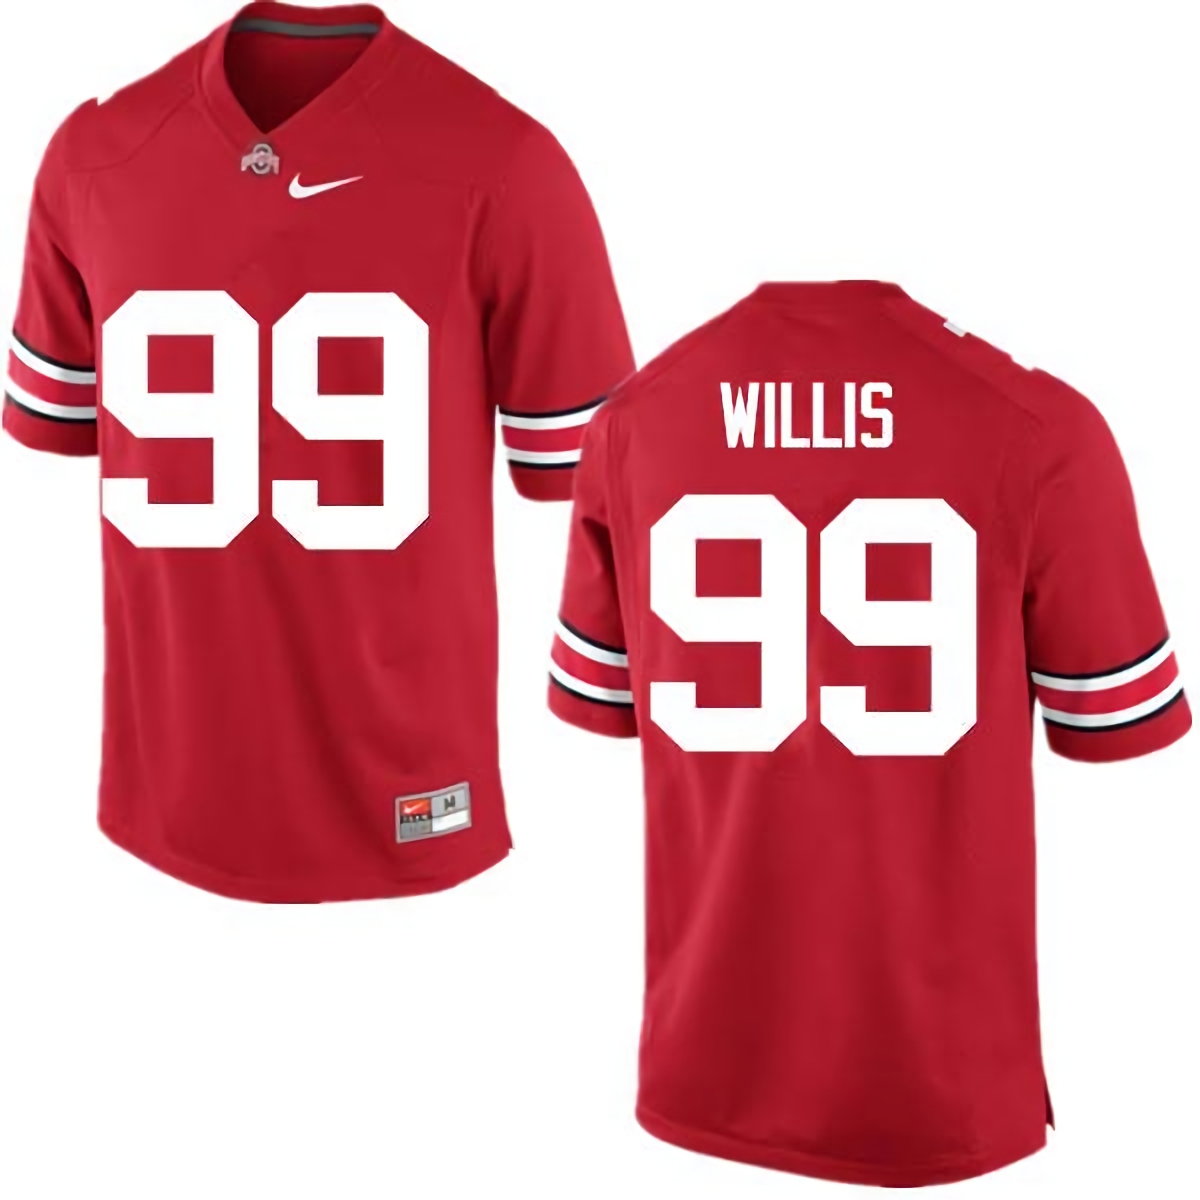 Bill Willis Ohio State Buckeyes Men's NCAA #99 Nike Red College Stitched Football Jersey QNK5756TY